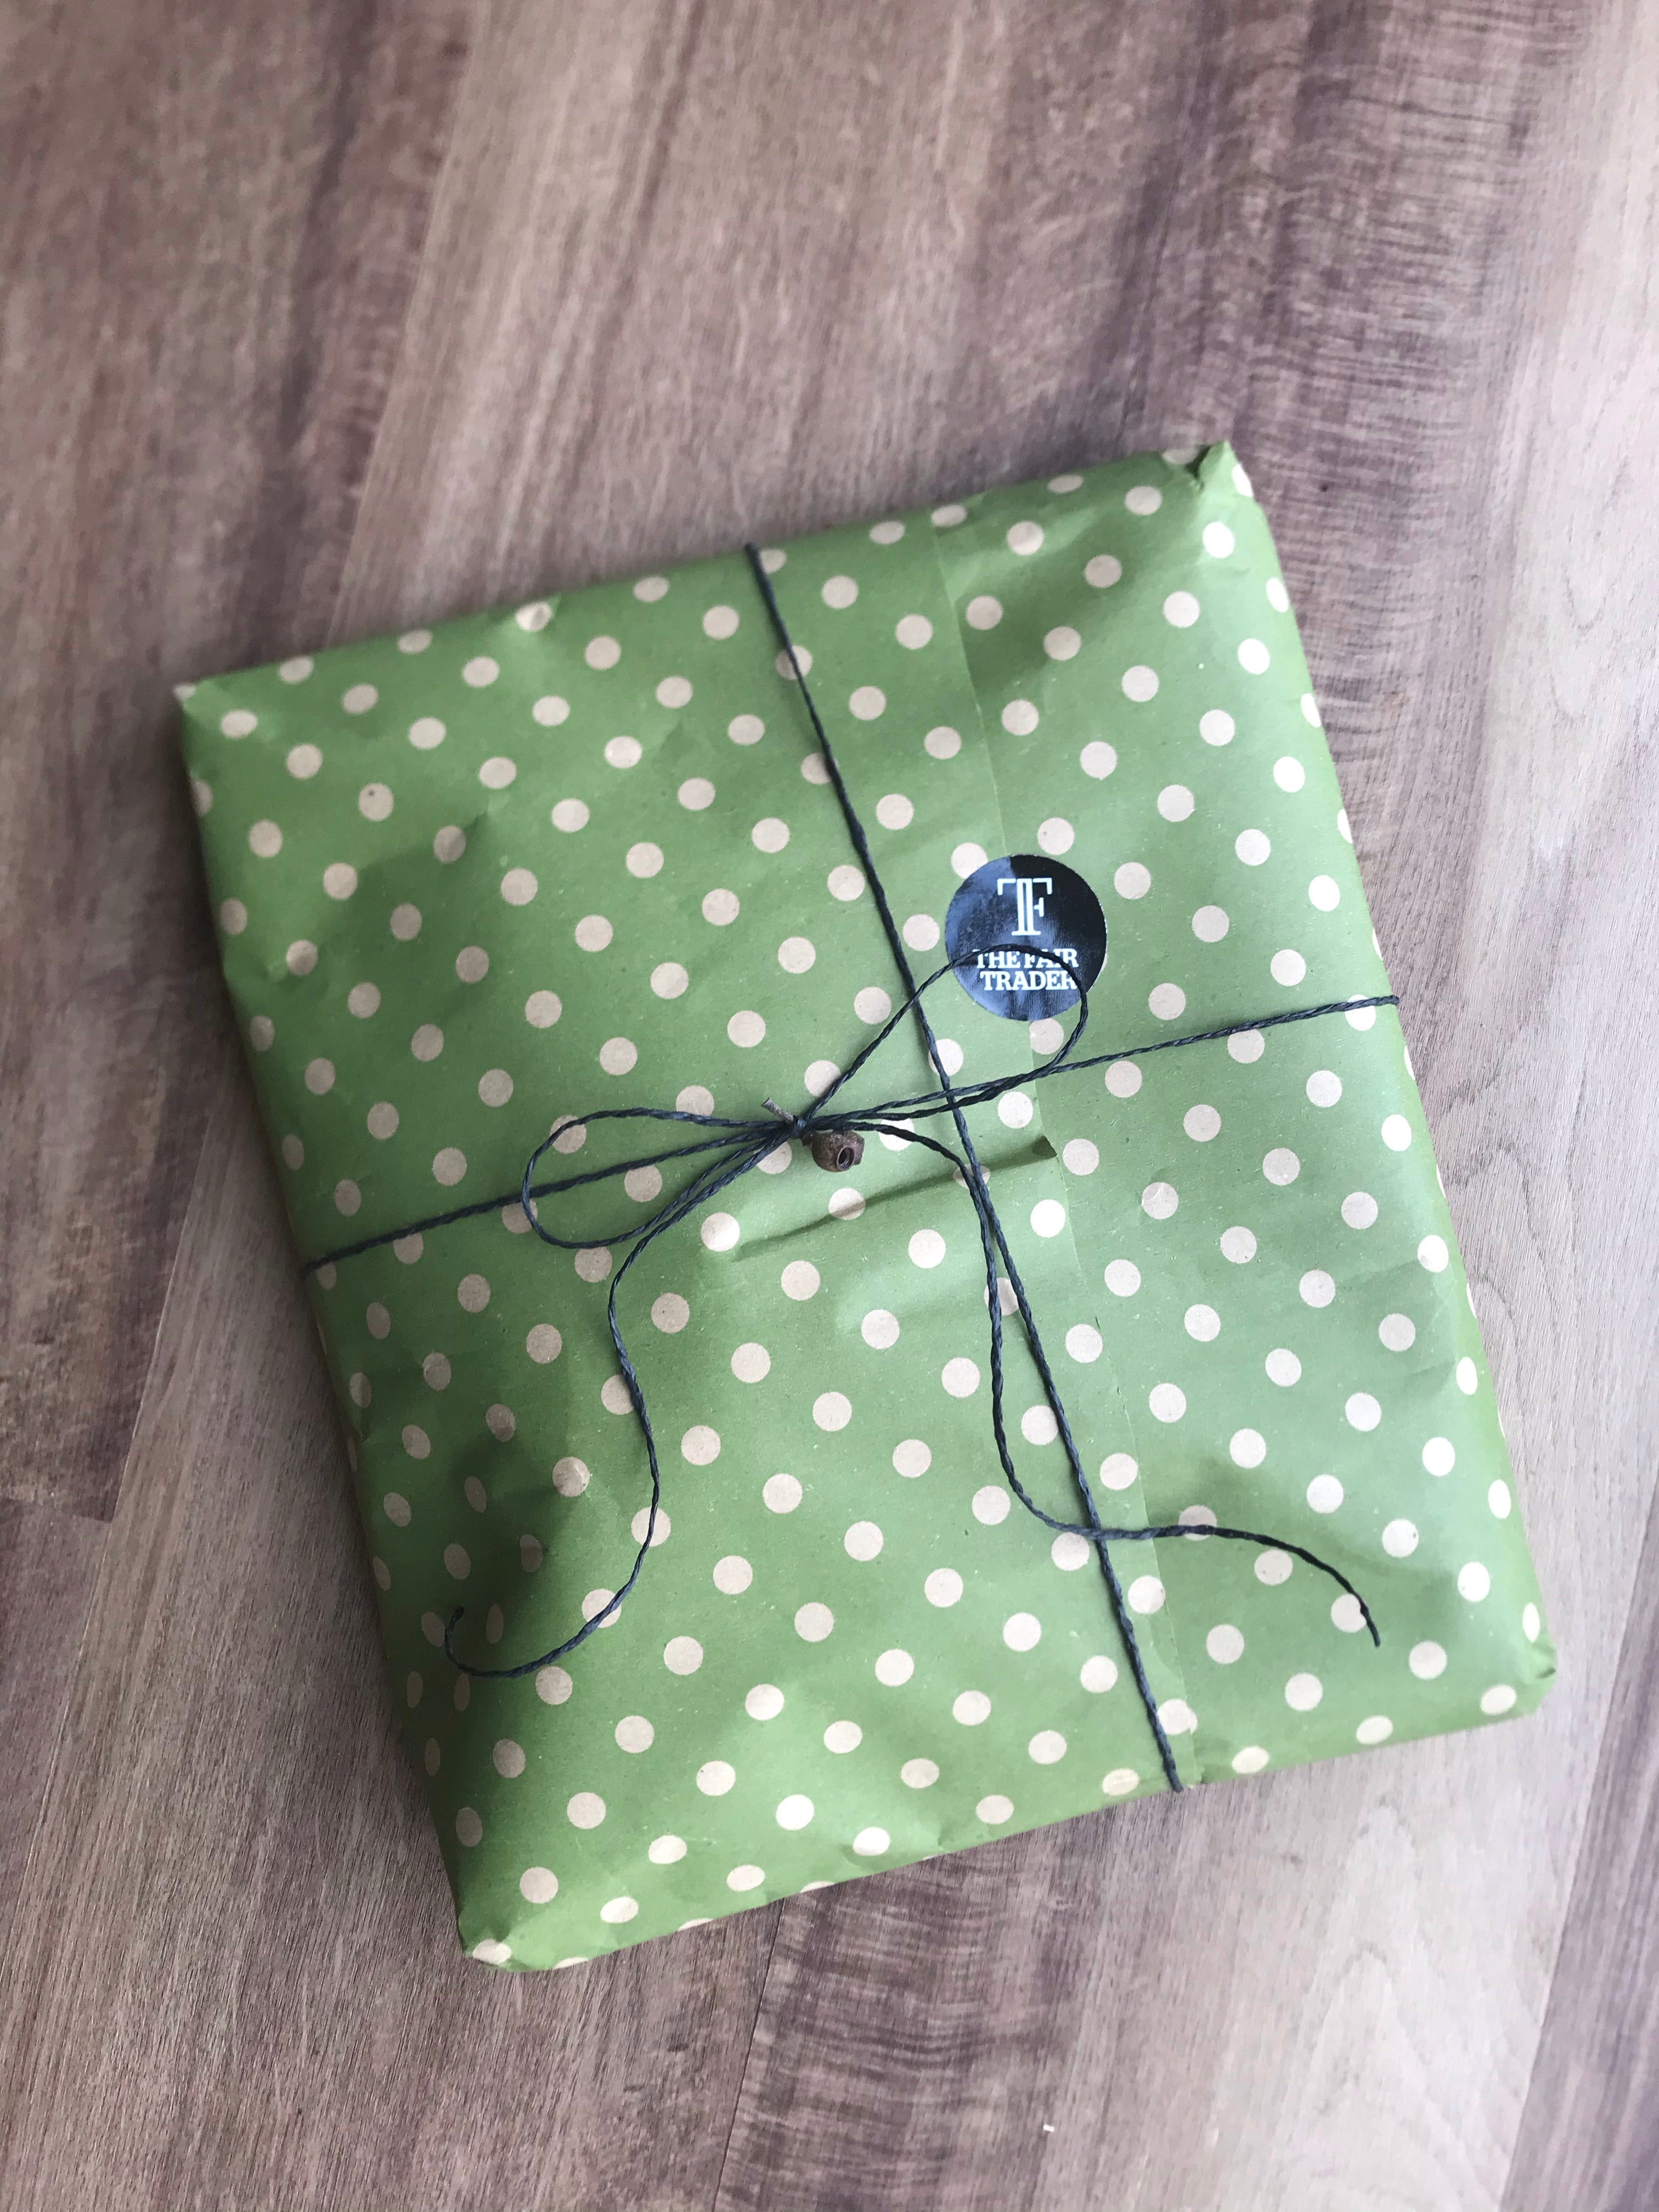 Gift Wrapping - The Fair Trader